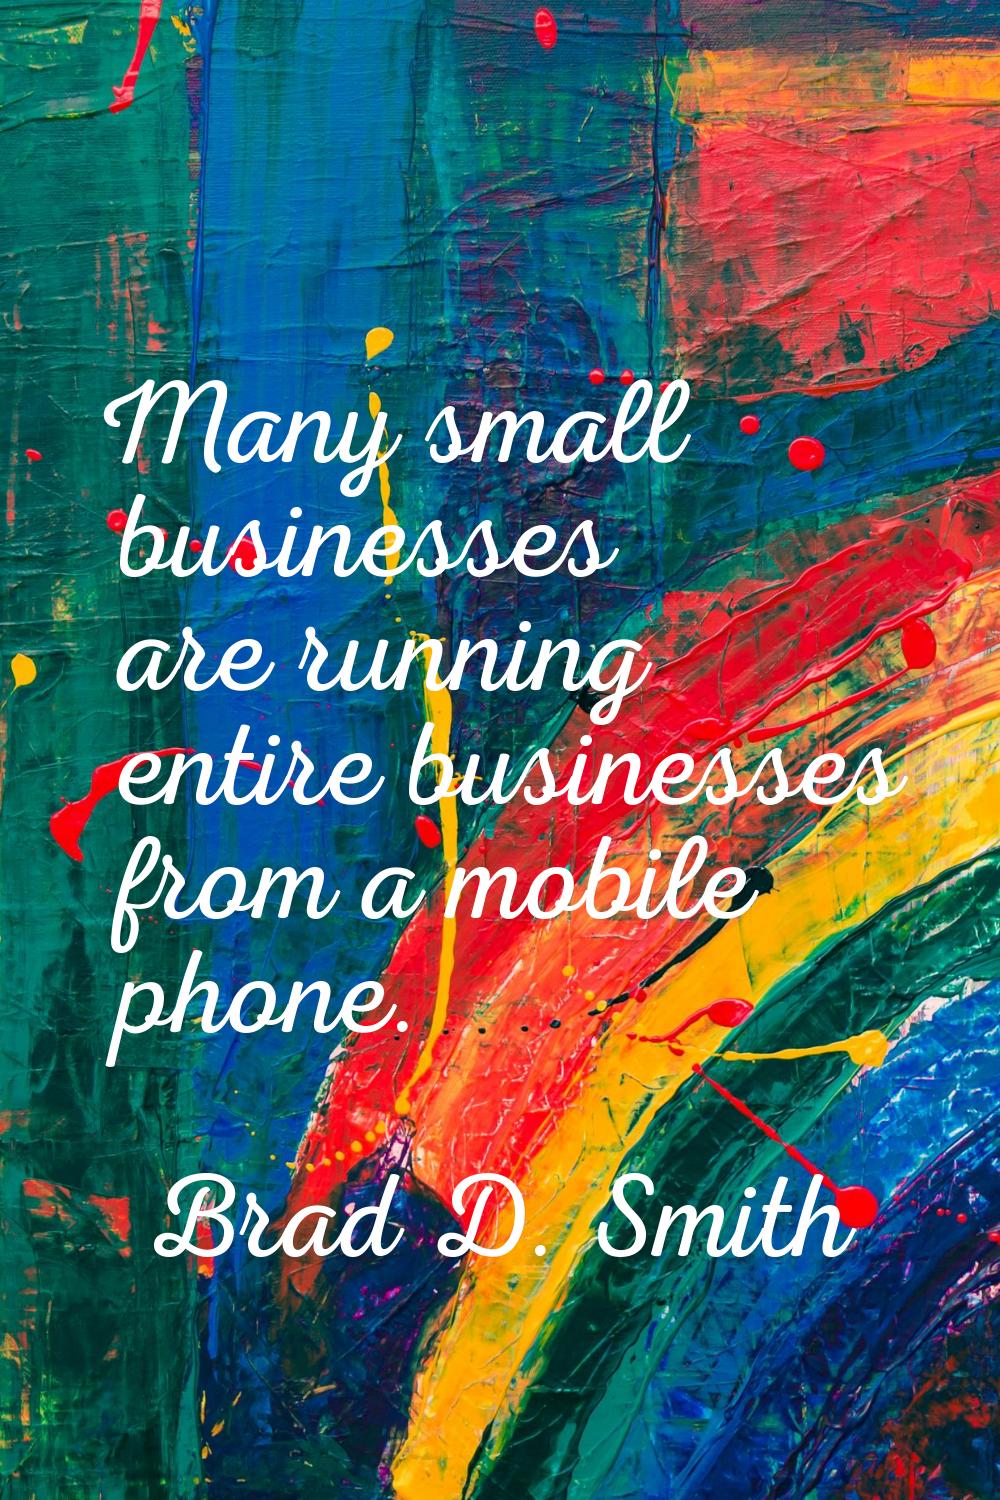 Many small businesses are running entire businesses from a mobile phone.